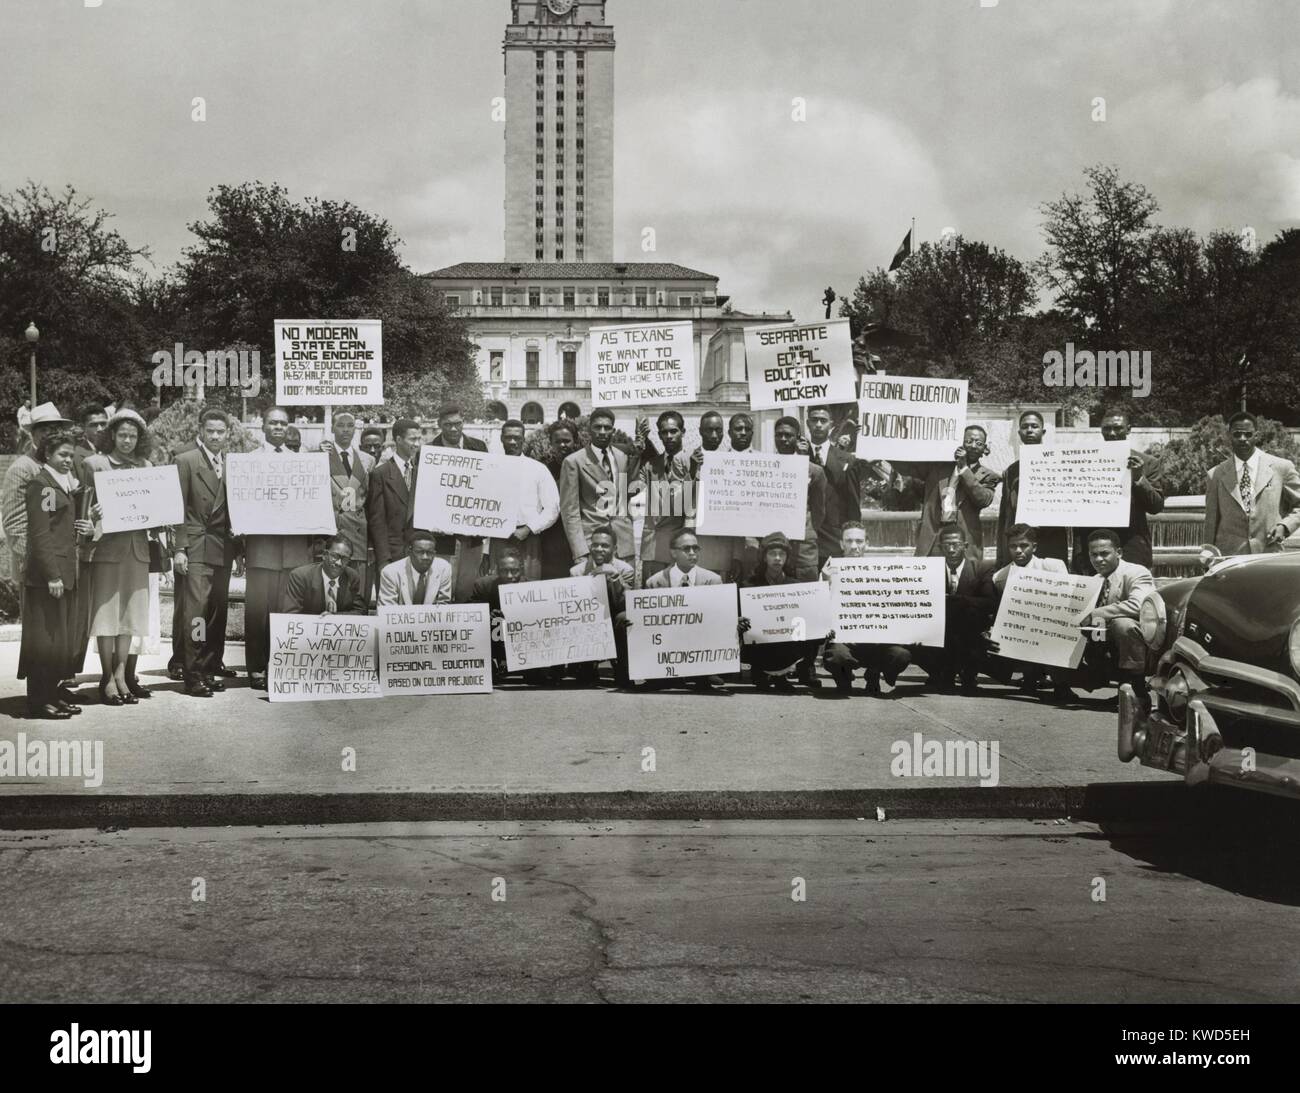 African Americans demonstrate against segregation at the University of Texas, Austin. 37 college seniors from Bishop, Wiley and Jarvis Colleges made application for entry into UT's graduate schools, but all were denied admission on racial grounds. April 27, 1949. (BSLOC 2014 13 119) Stock Photo